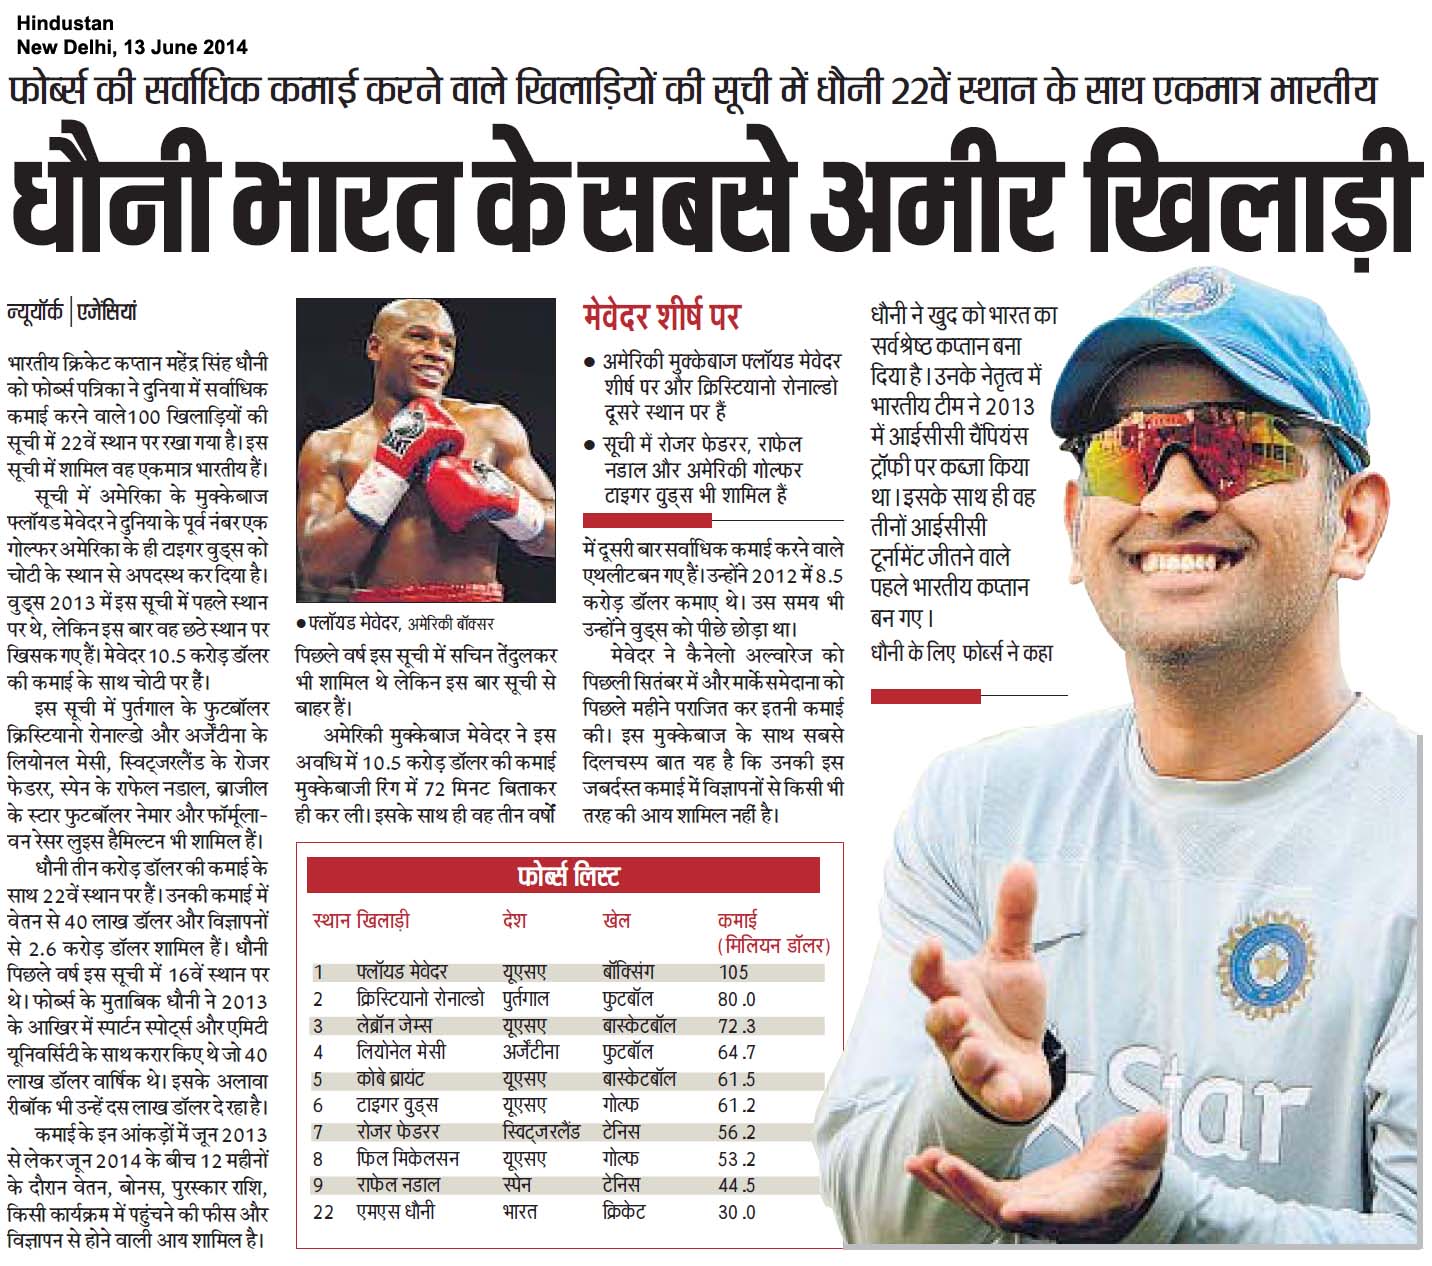 todays news headlines of sports in hindi